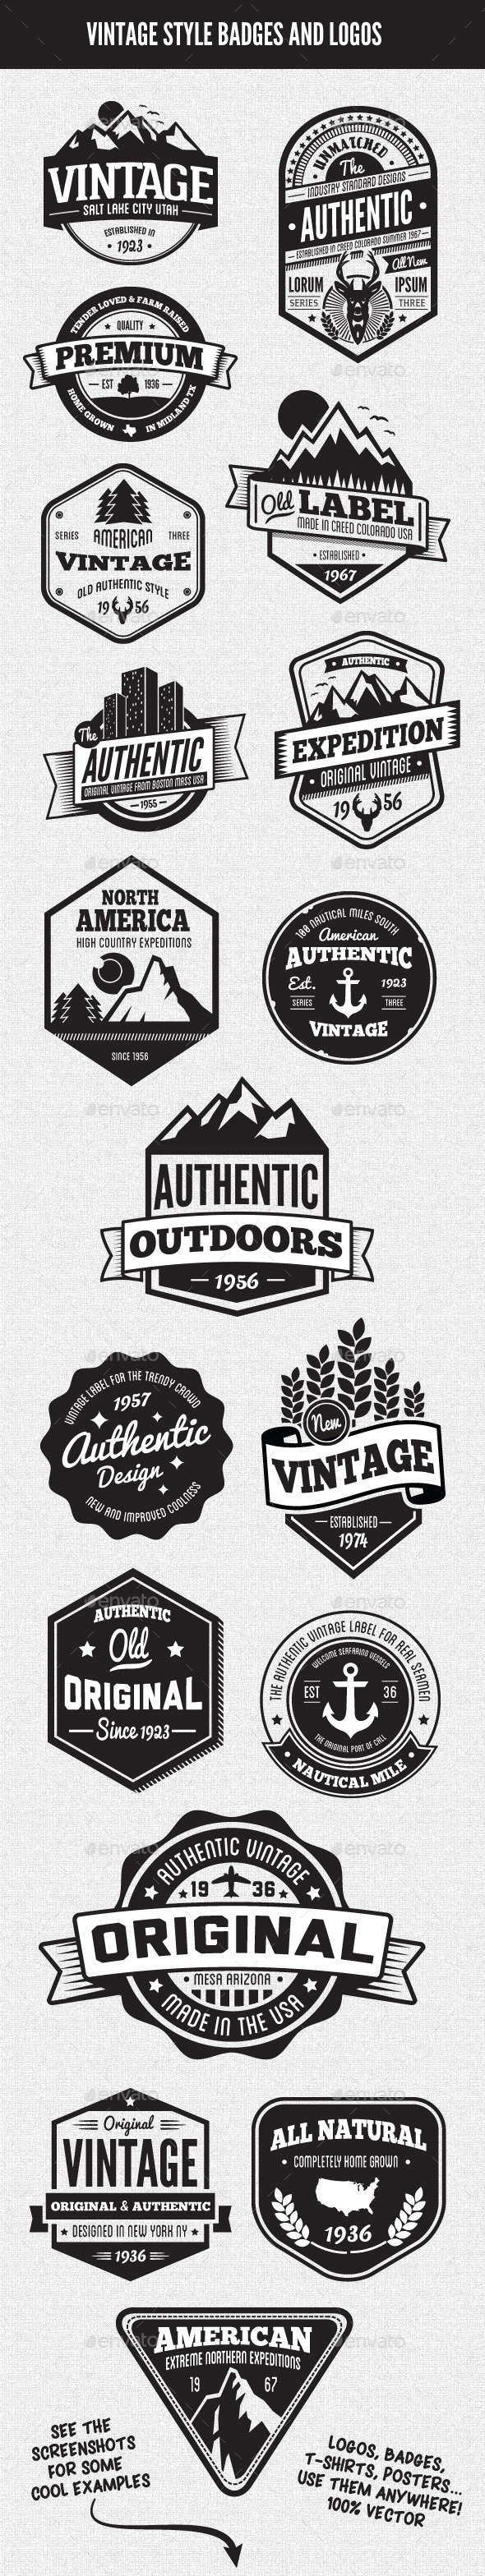 Vintage Style Badges and Logos Vol 3 by GraphicMonkee | GraphicRiver